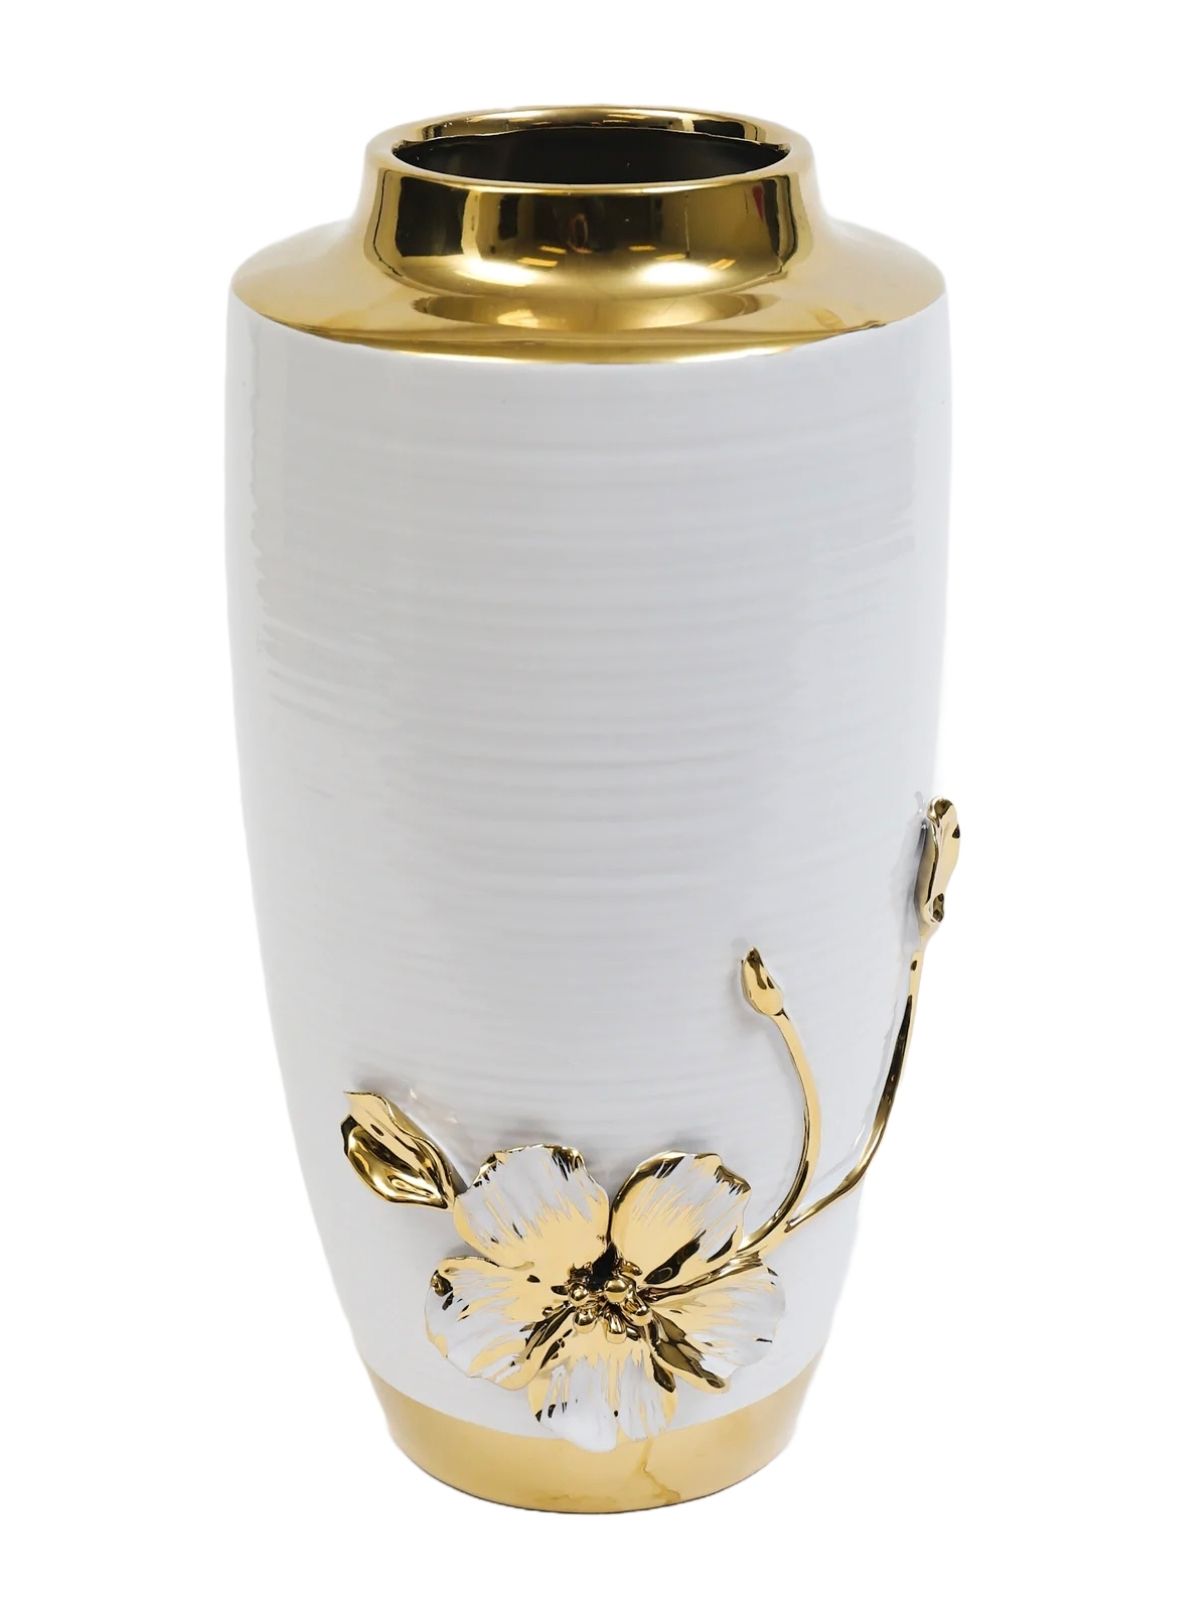 14H White Ceramic Decorative Vase With Luxury Gold Floral Detail - KYA Home Decor